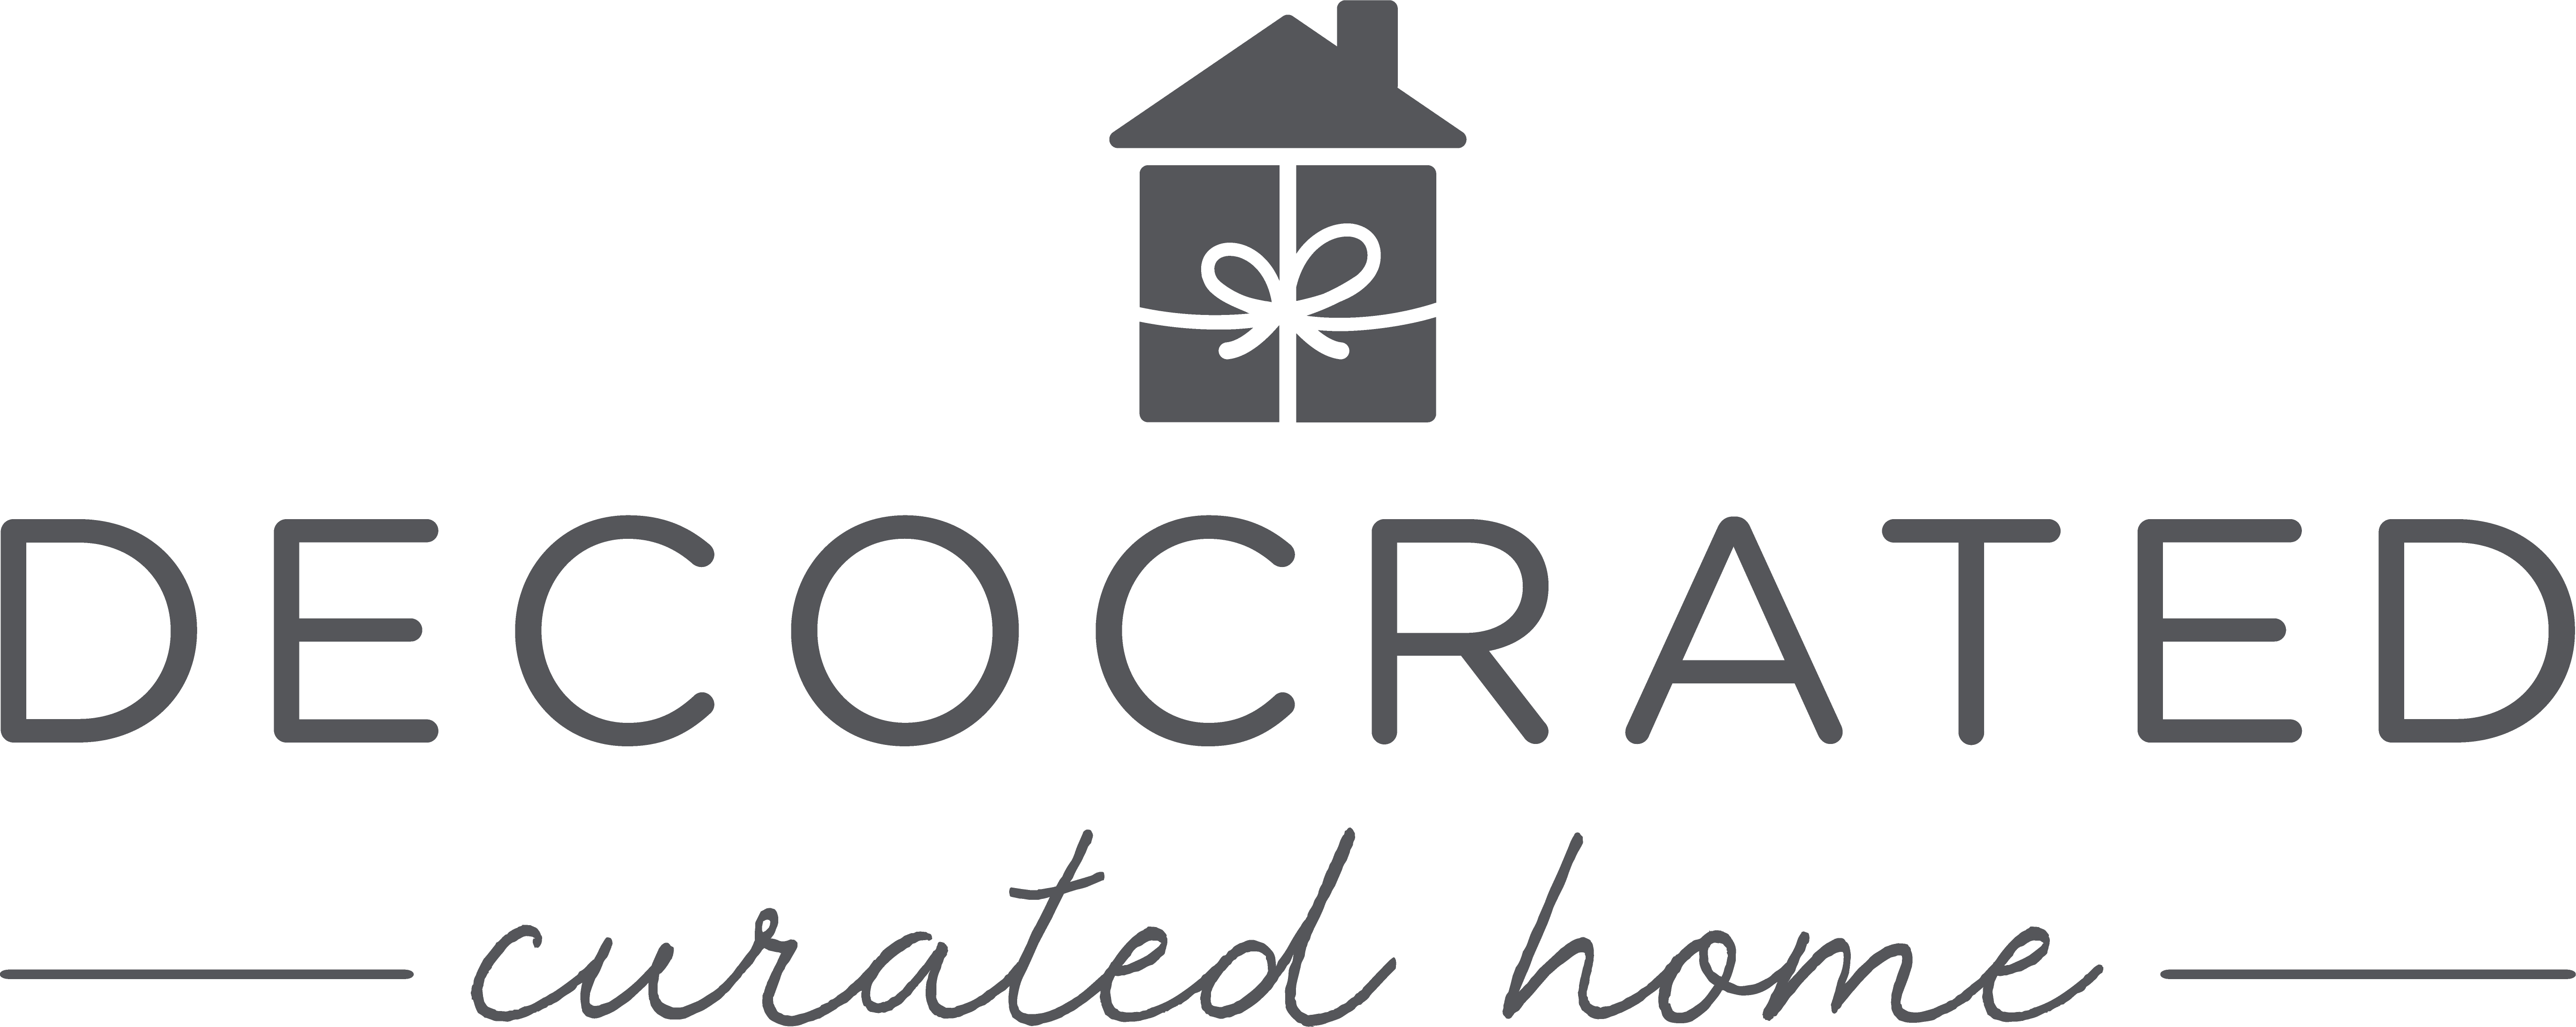 Decocrated Curated Home logo